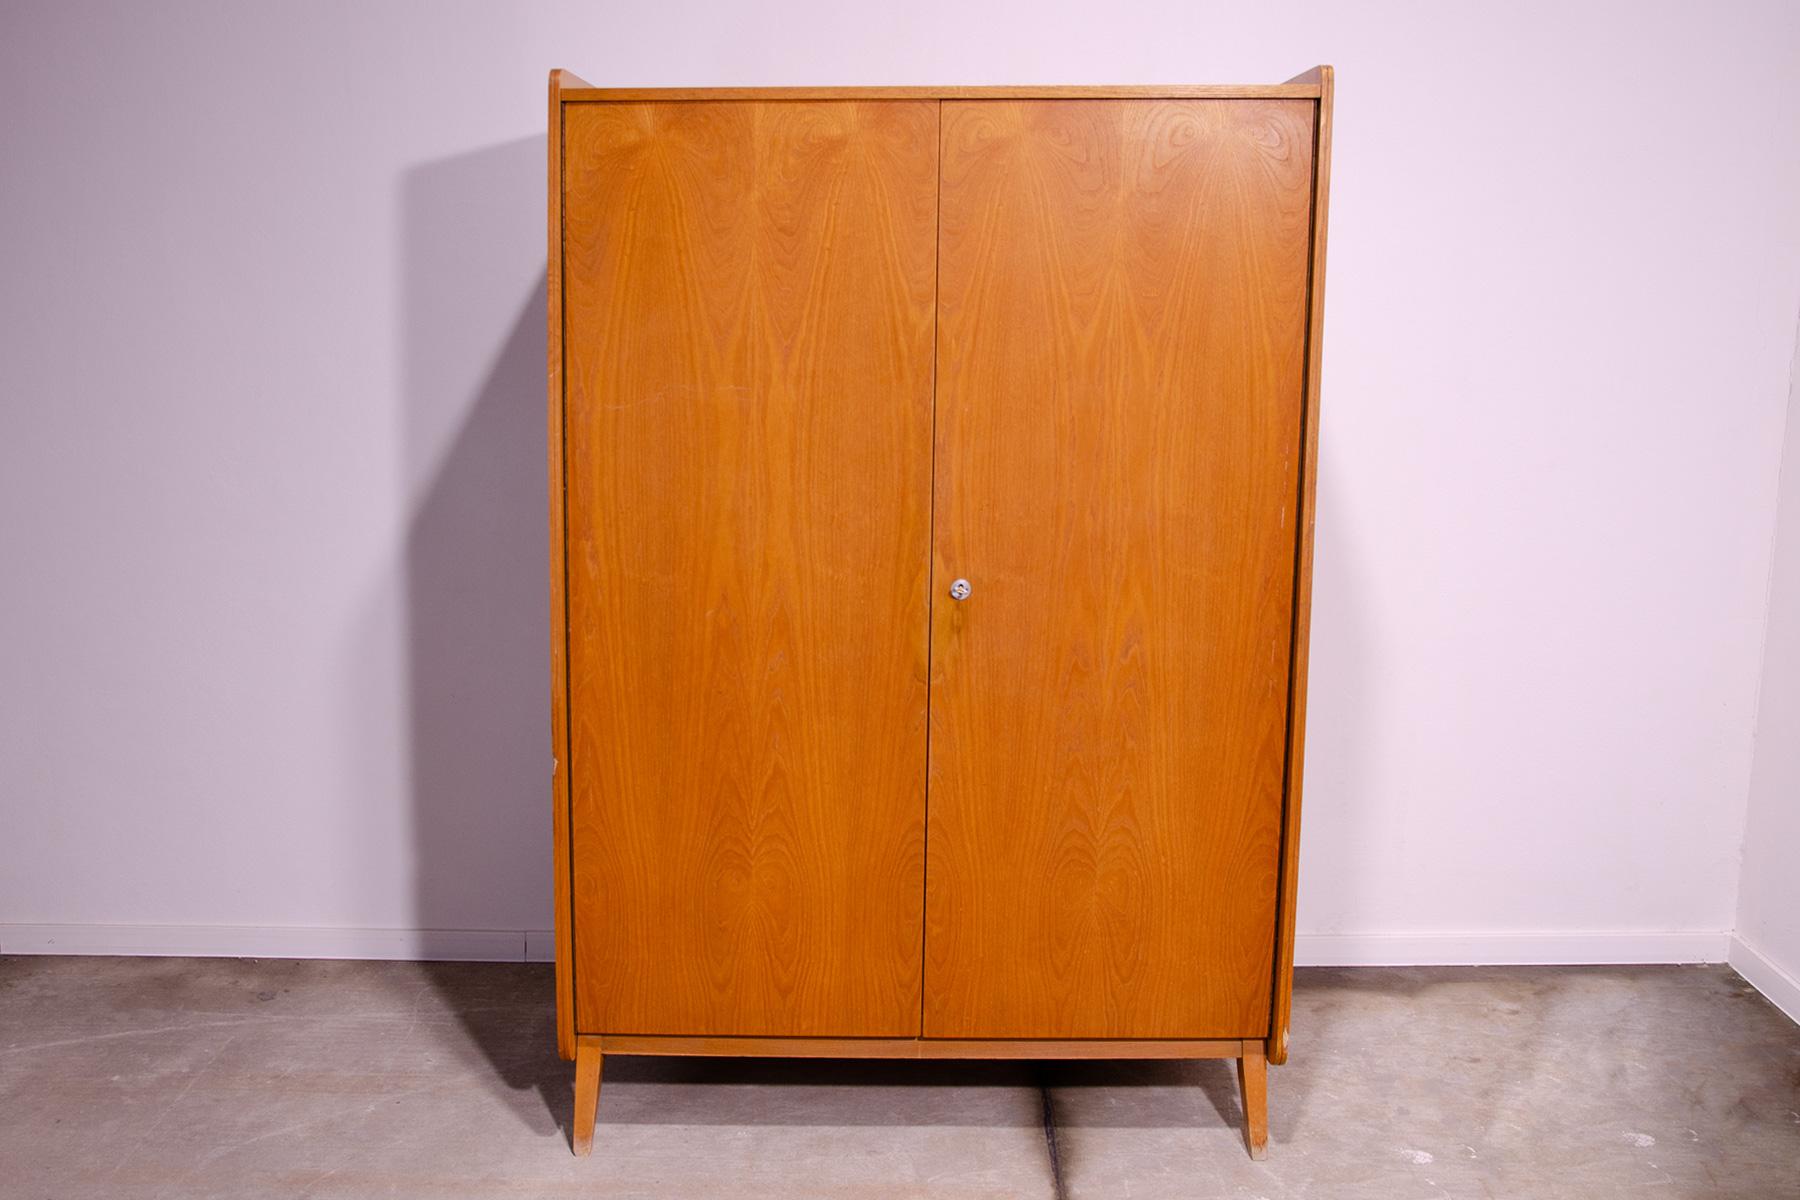 This wardrobe was designed by František Jirák for Tatra nábytok company in the former Czechoslovakia in the 1960´s

It´s made of beechwood and plywood. There are 8 shelves inside, but they are removable.

You can hang your clothes in it, as well as